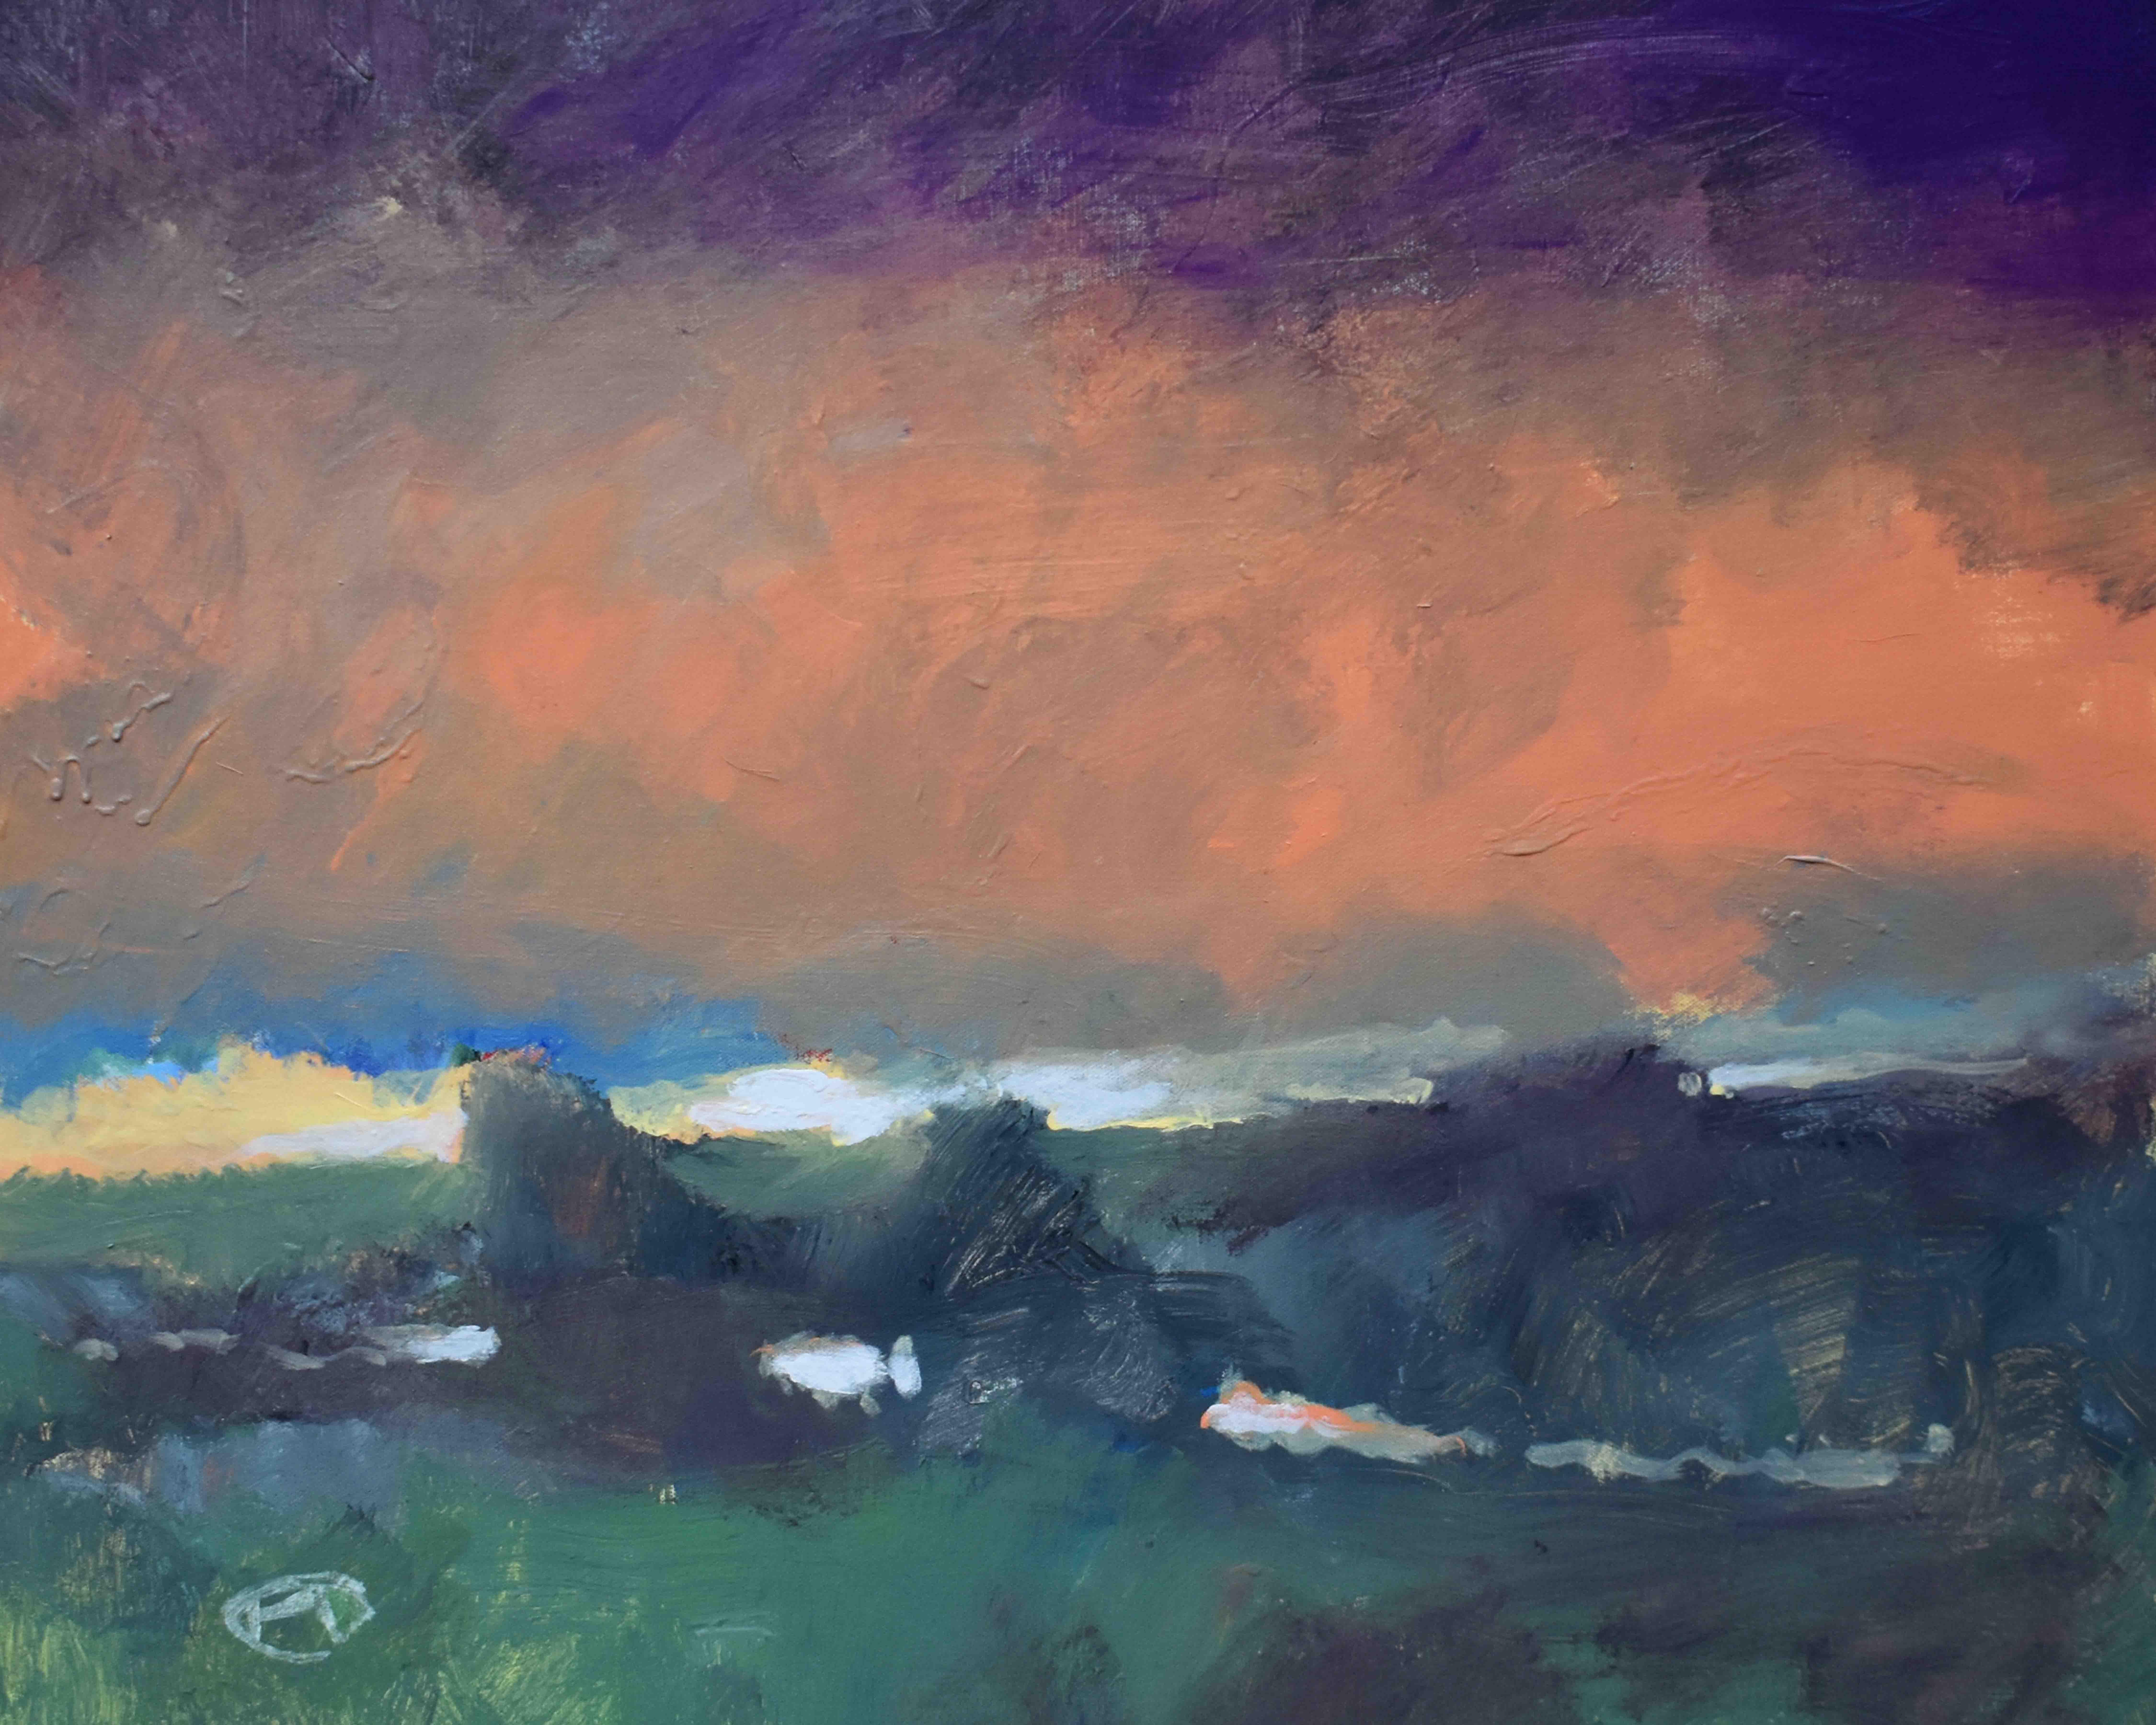 <p>Artist Comments<br />An abstract landscape painted in bands of green, tangerine and deep purple, with touches of blue and yellow to complete the rich composition. A strip of light on the far horizon encourages the viewer to venture farther into